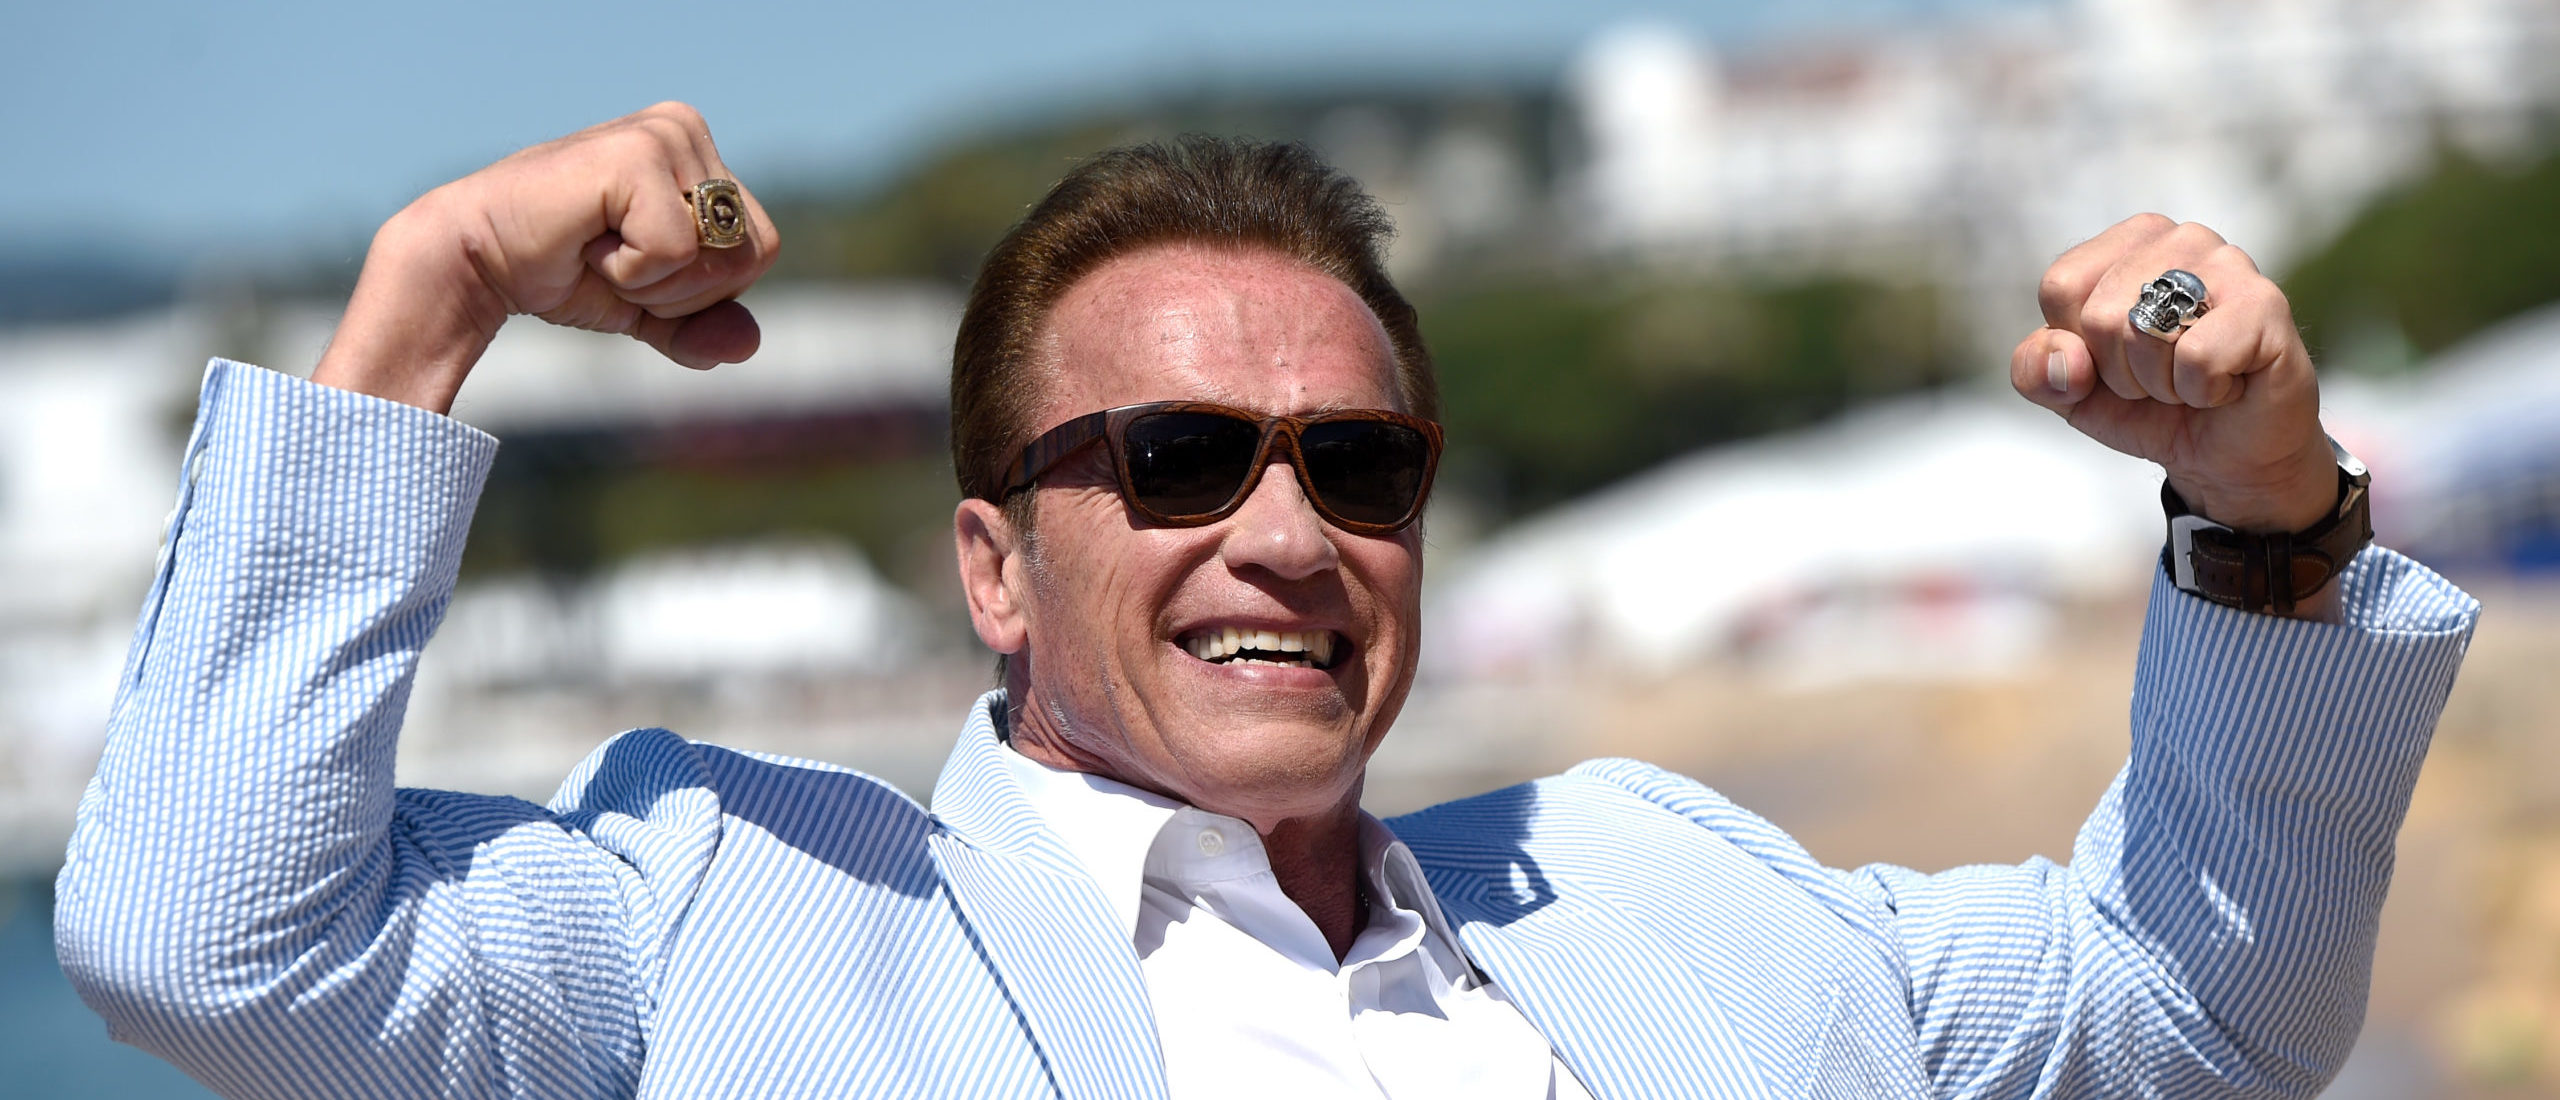 He’ll Be Back Arnold Schwarzenegger Reportedly Set To Return To Action Movies The Daily Caller